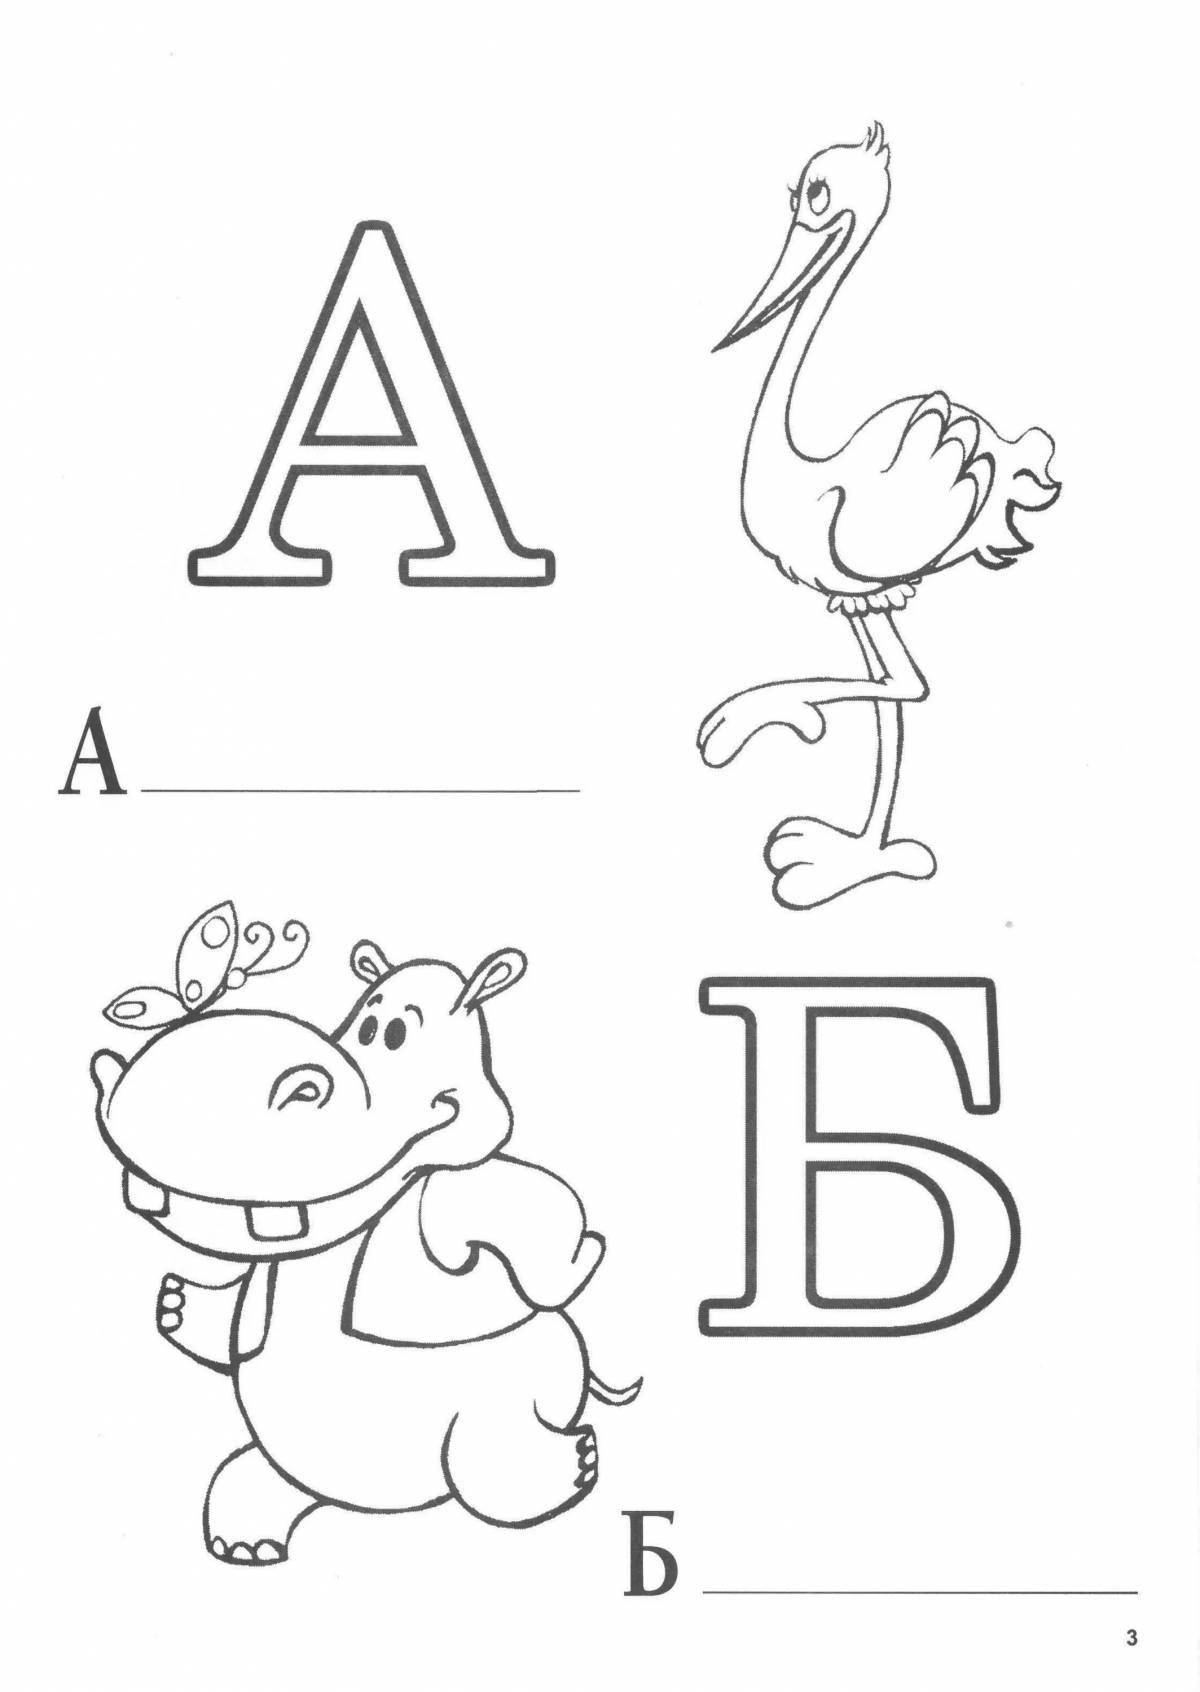 Creative alphabet coloring book for 5-6 year olds